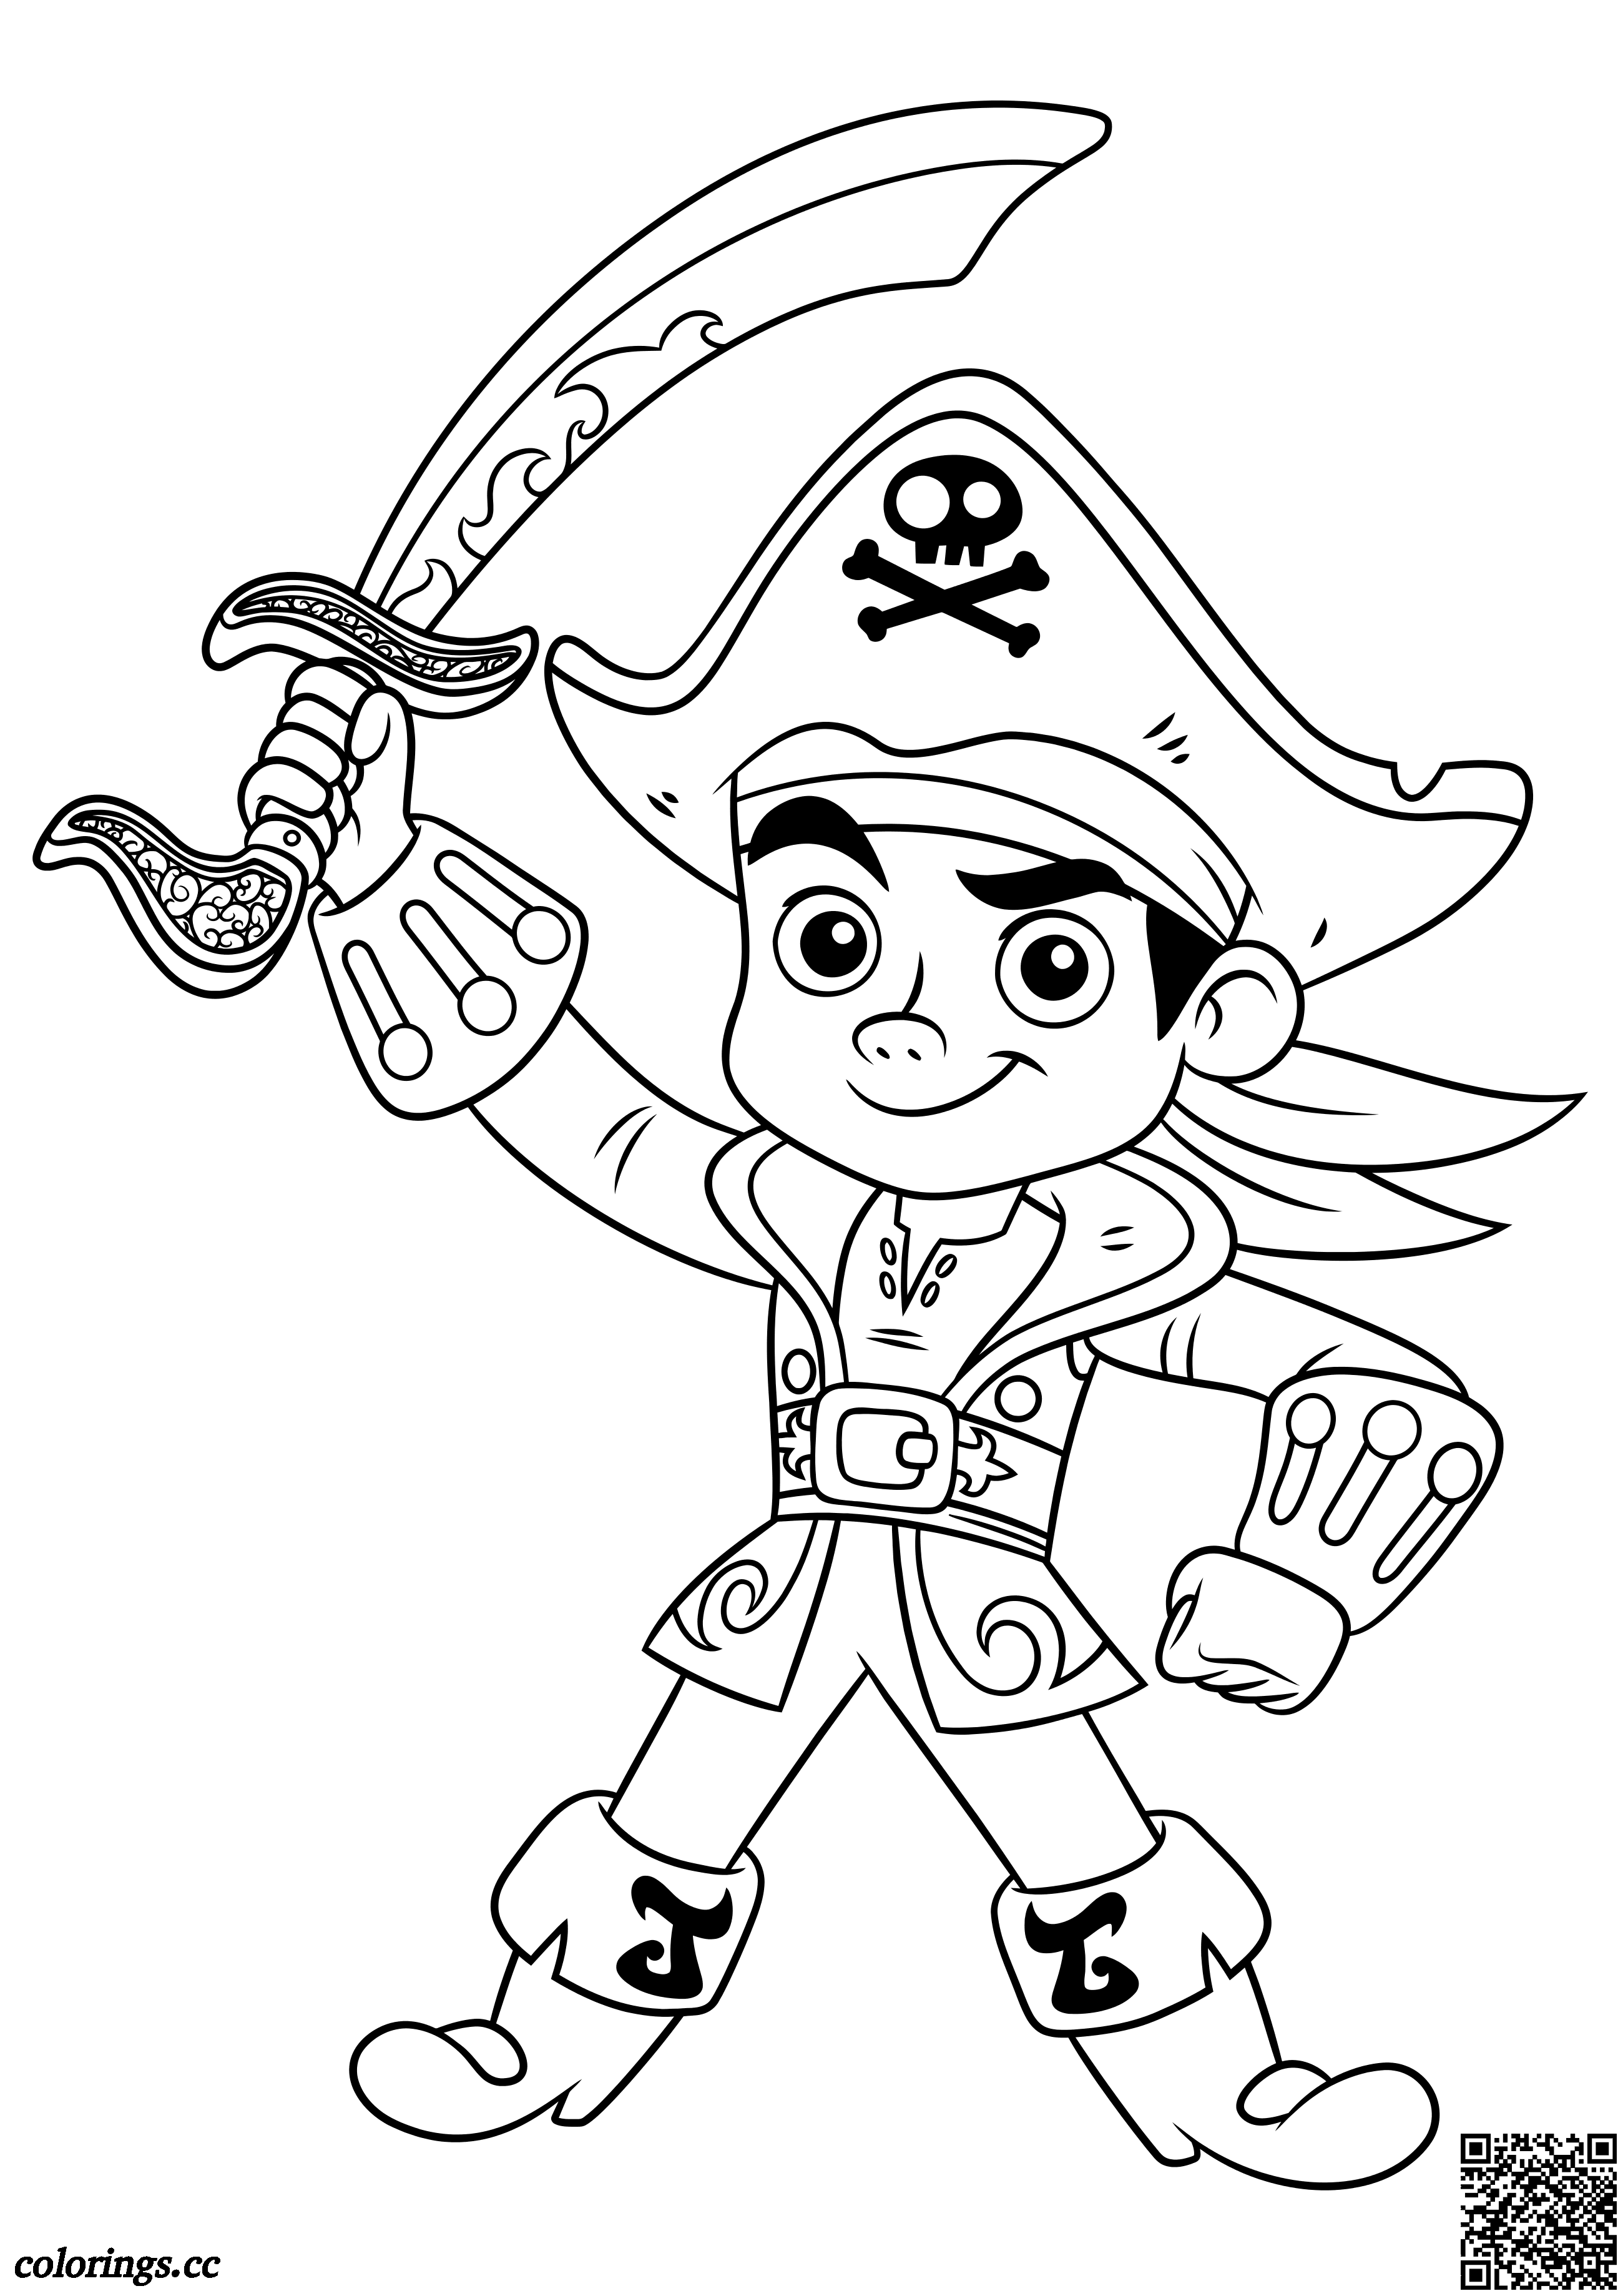 Captain Jake coloring pages, Jake and the Neverland Pirates coloring